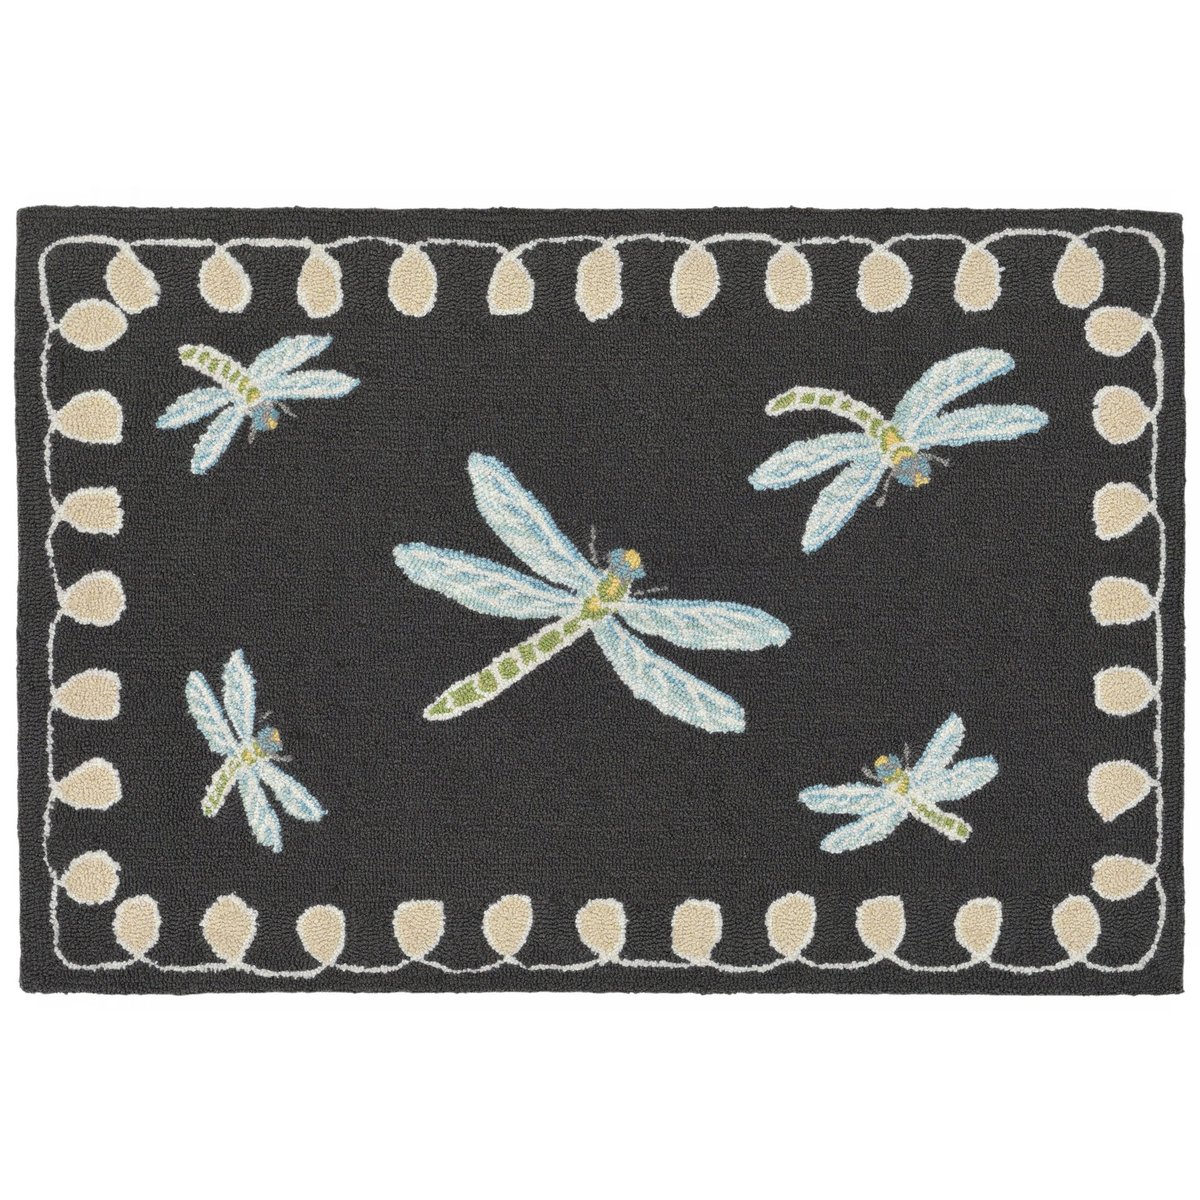 Home and Living Bedroom Dragonflies on Black Floor Carpet Rug Made to Order Indoor Area Rug Rug for Living Room Outdoor Custom Made